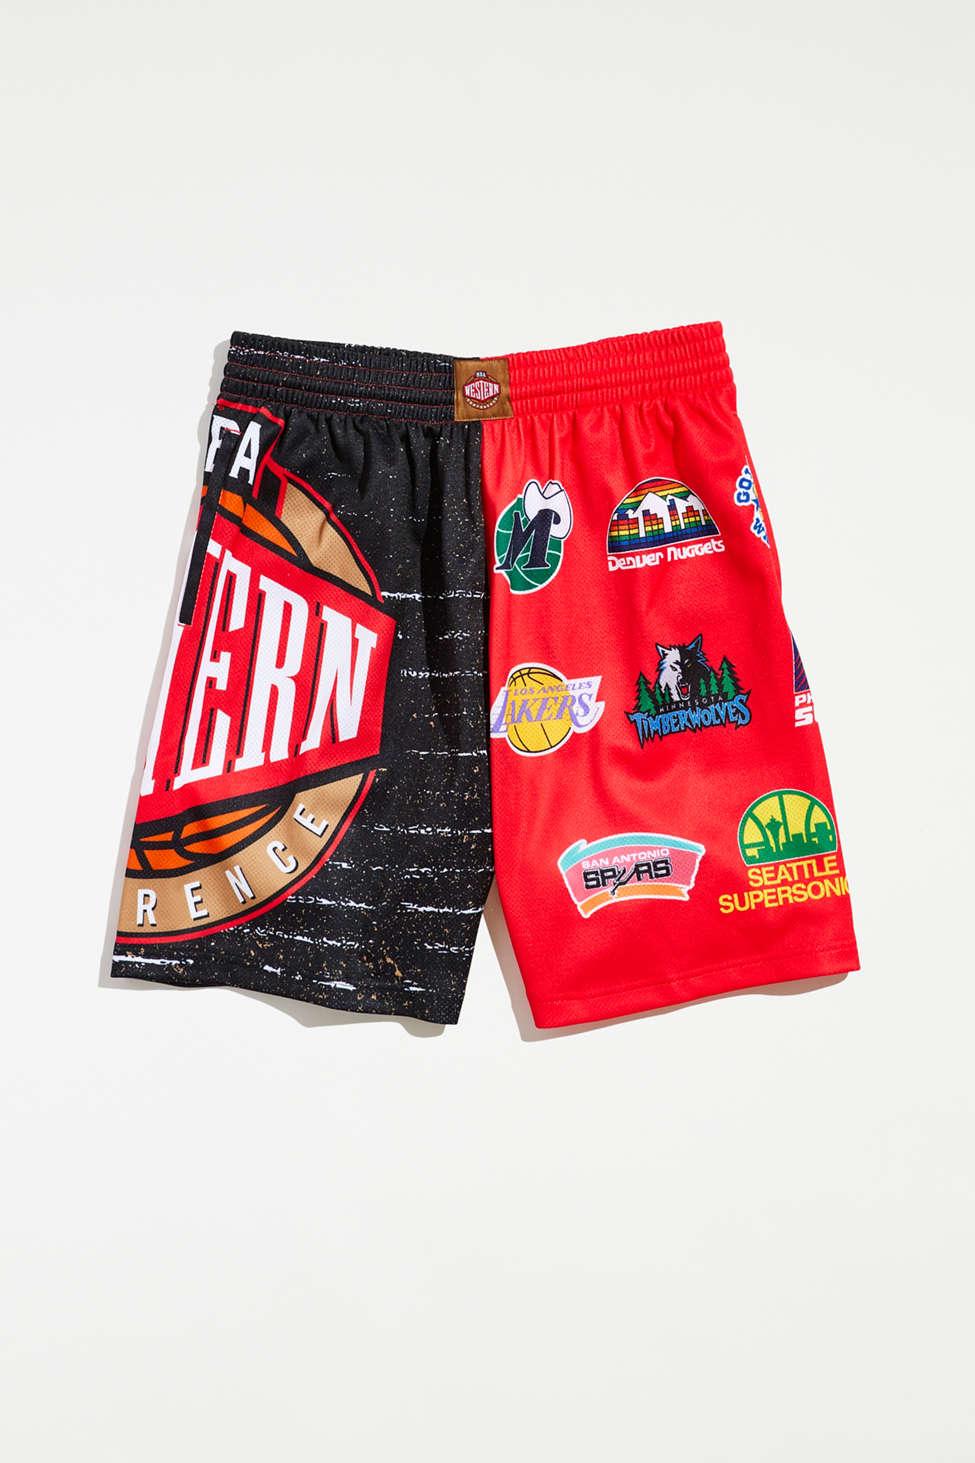 WESTERN CONFERENCE SHORTS